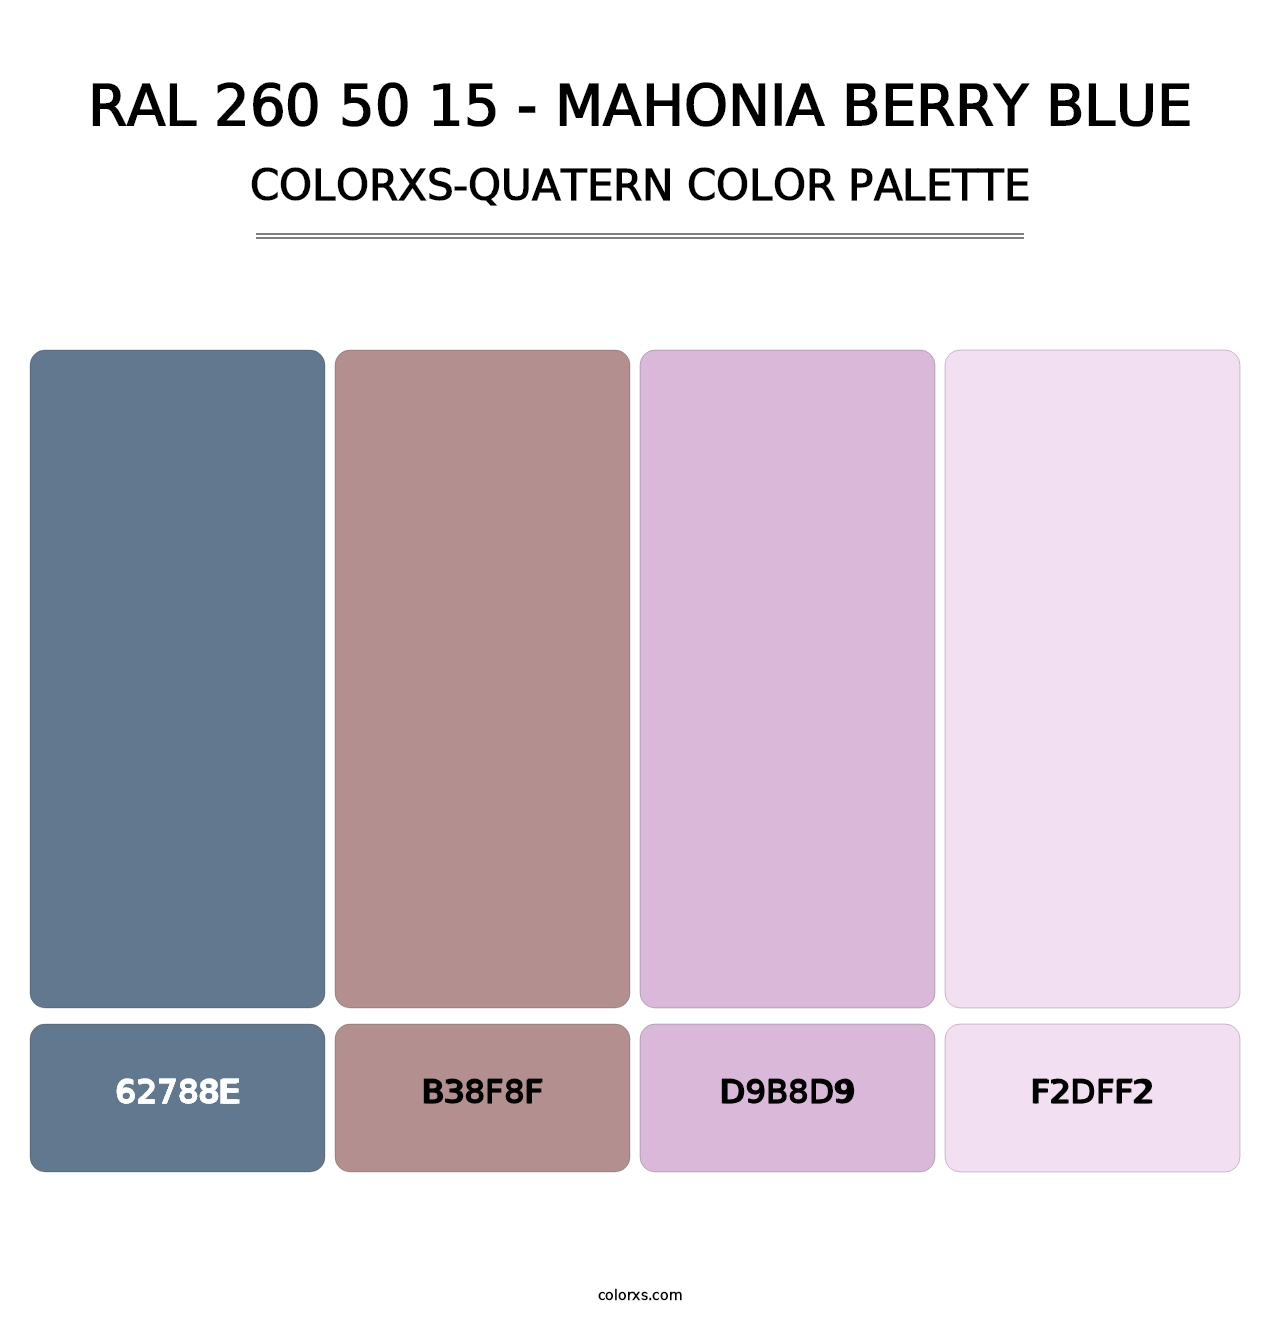 RAL 260 50 15 - Mahonia Berry Blue - Colorxs Quatern Palette